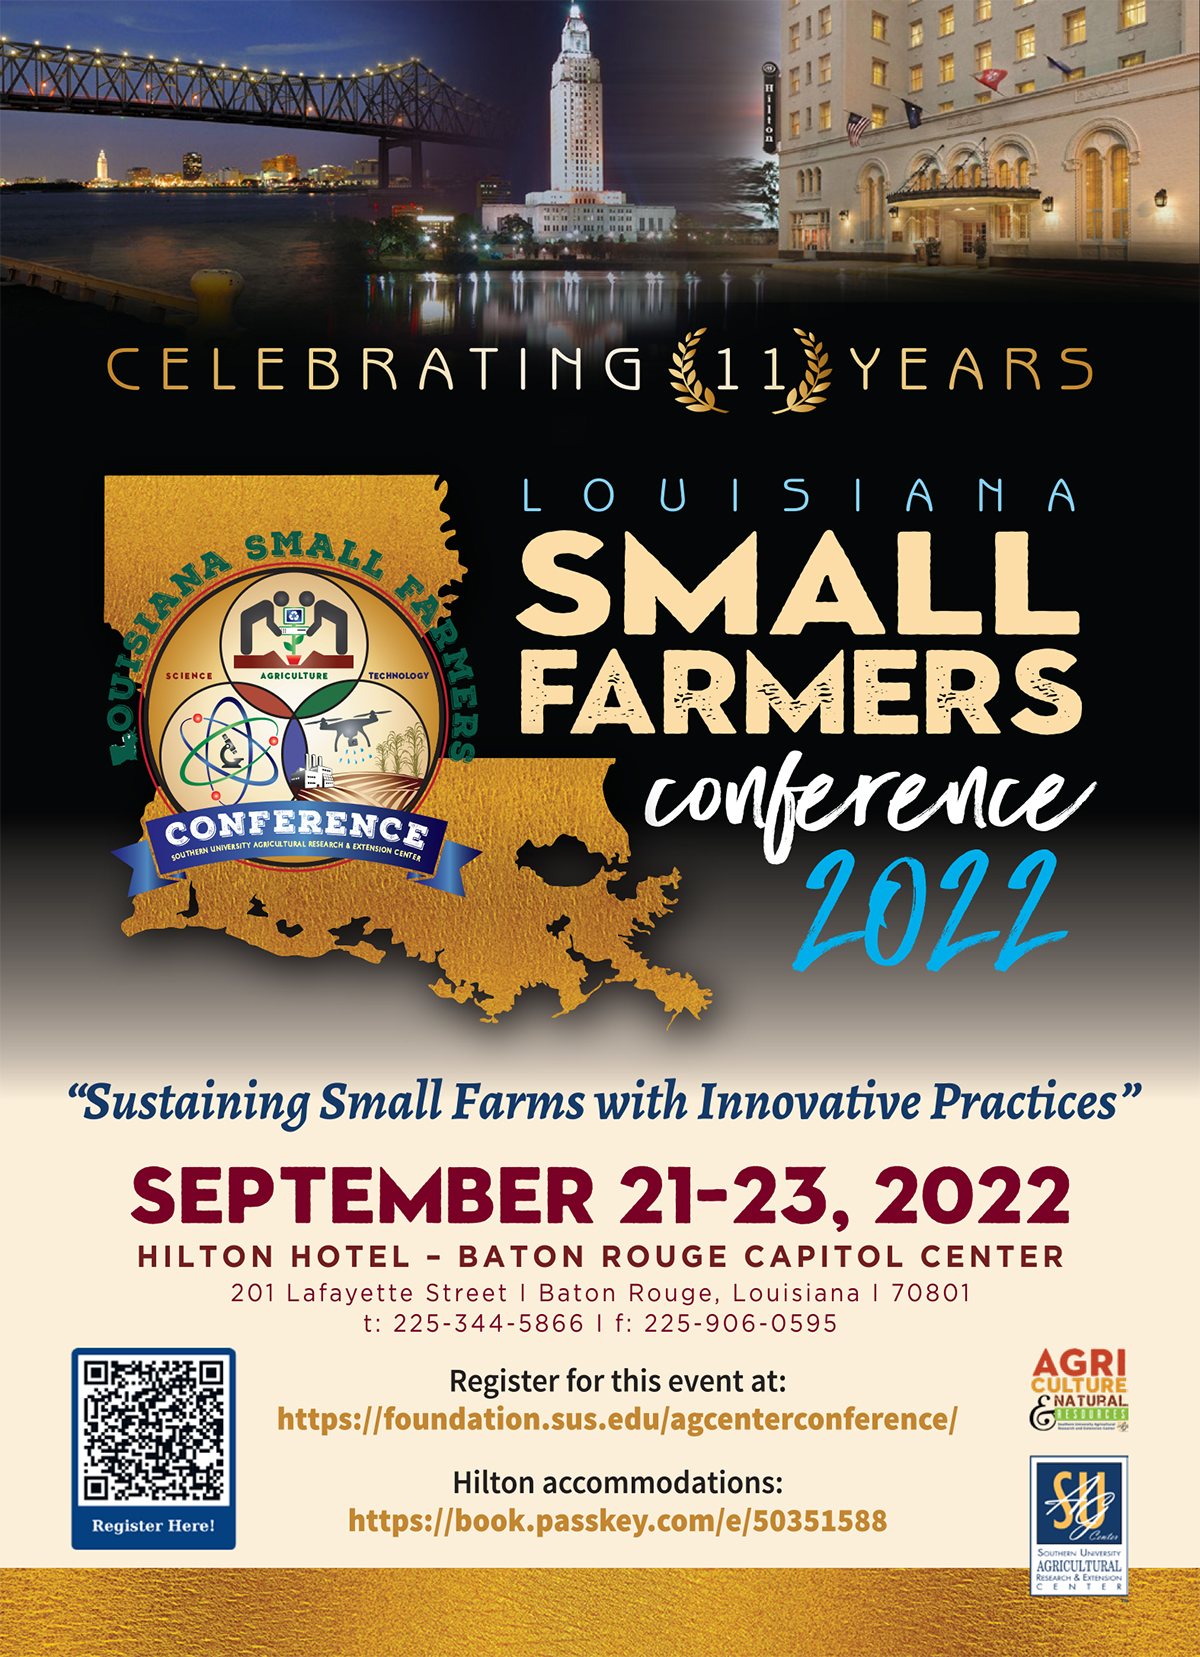 Small Farmer Conference flyer